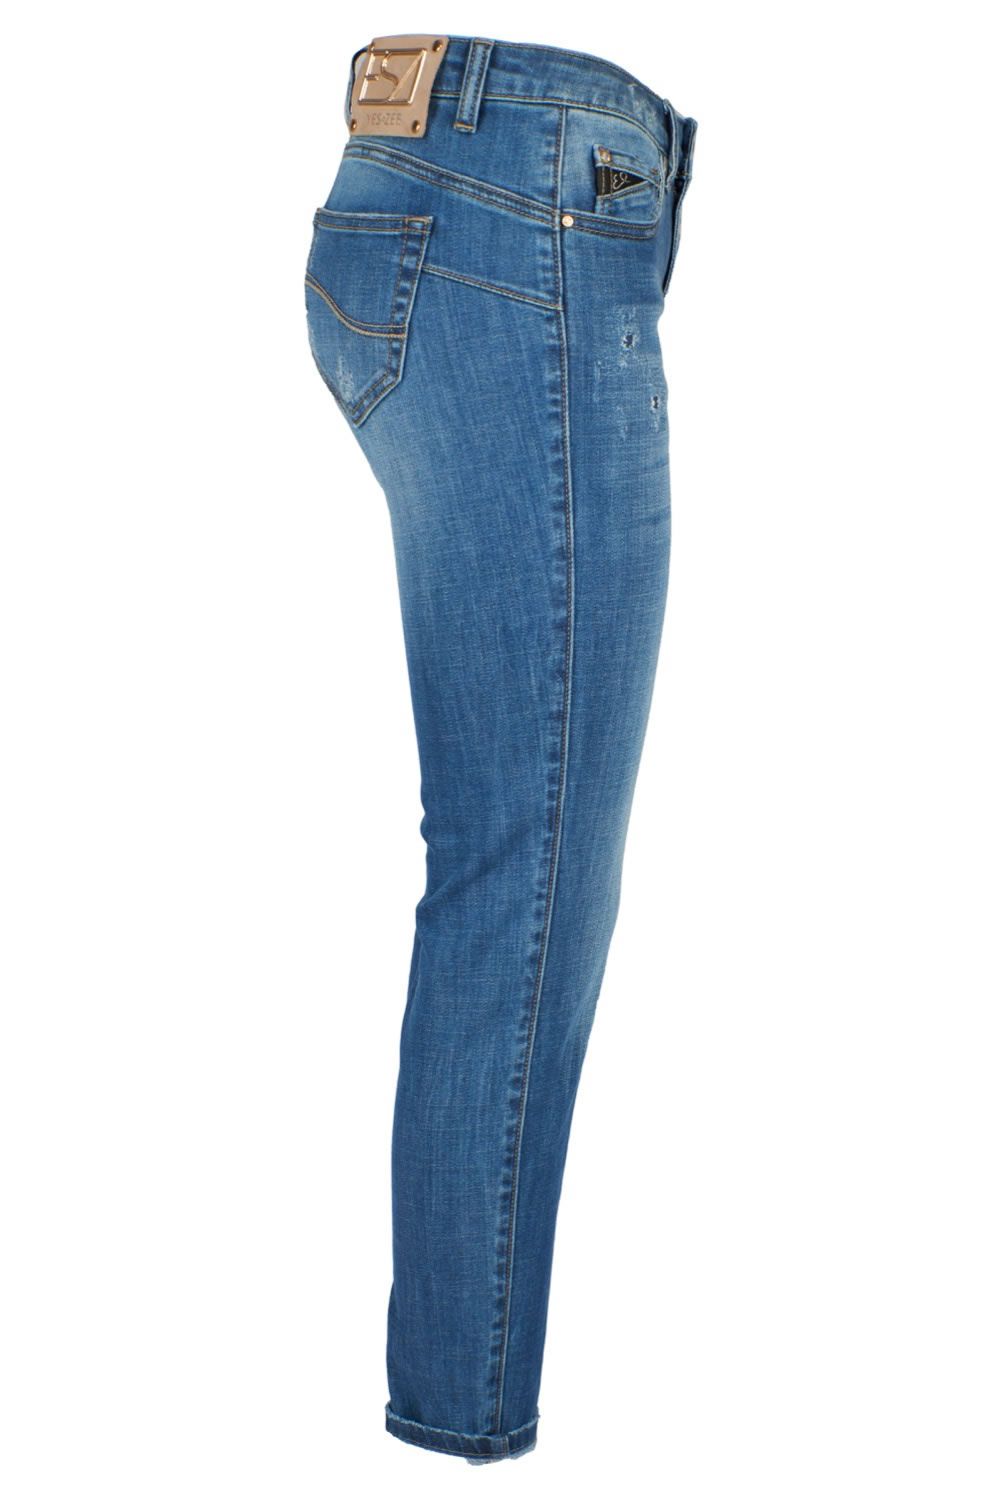 Chic Scratched Blue Denim for Women